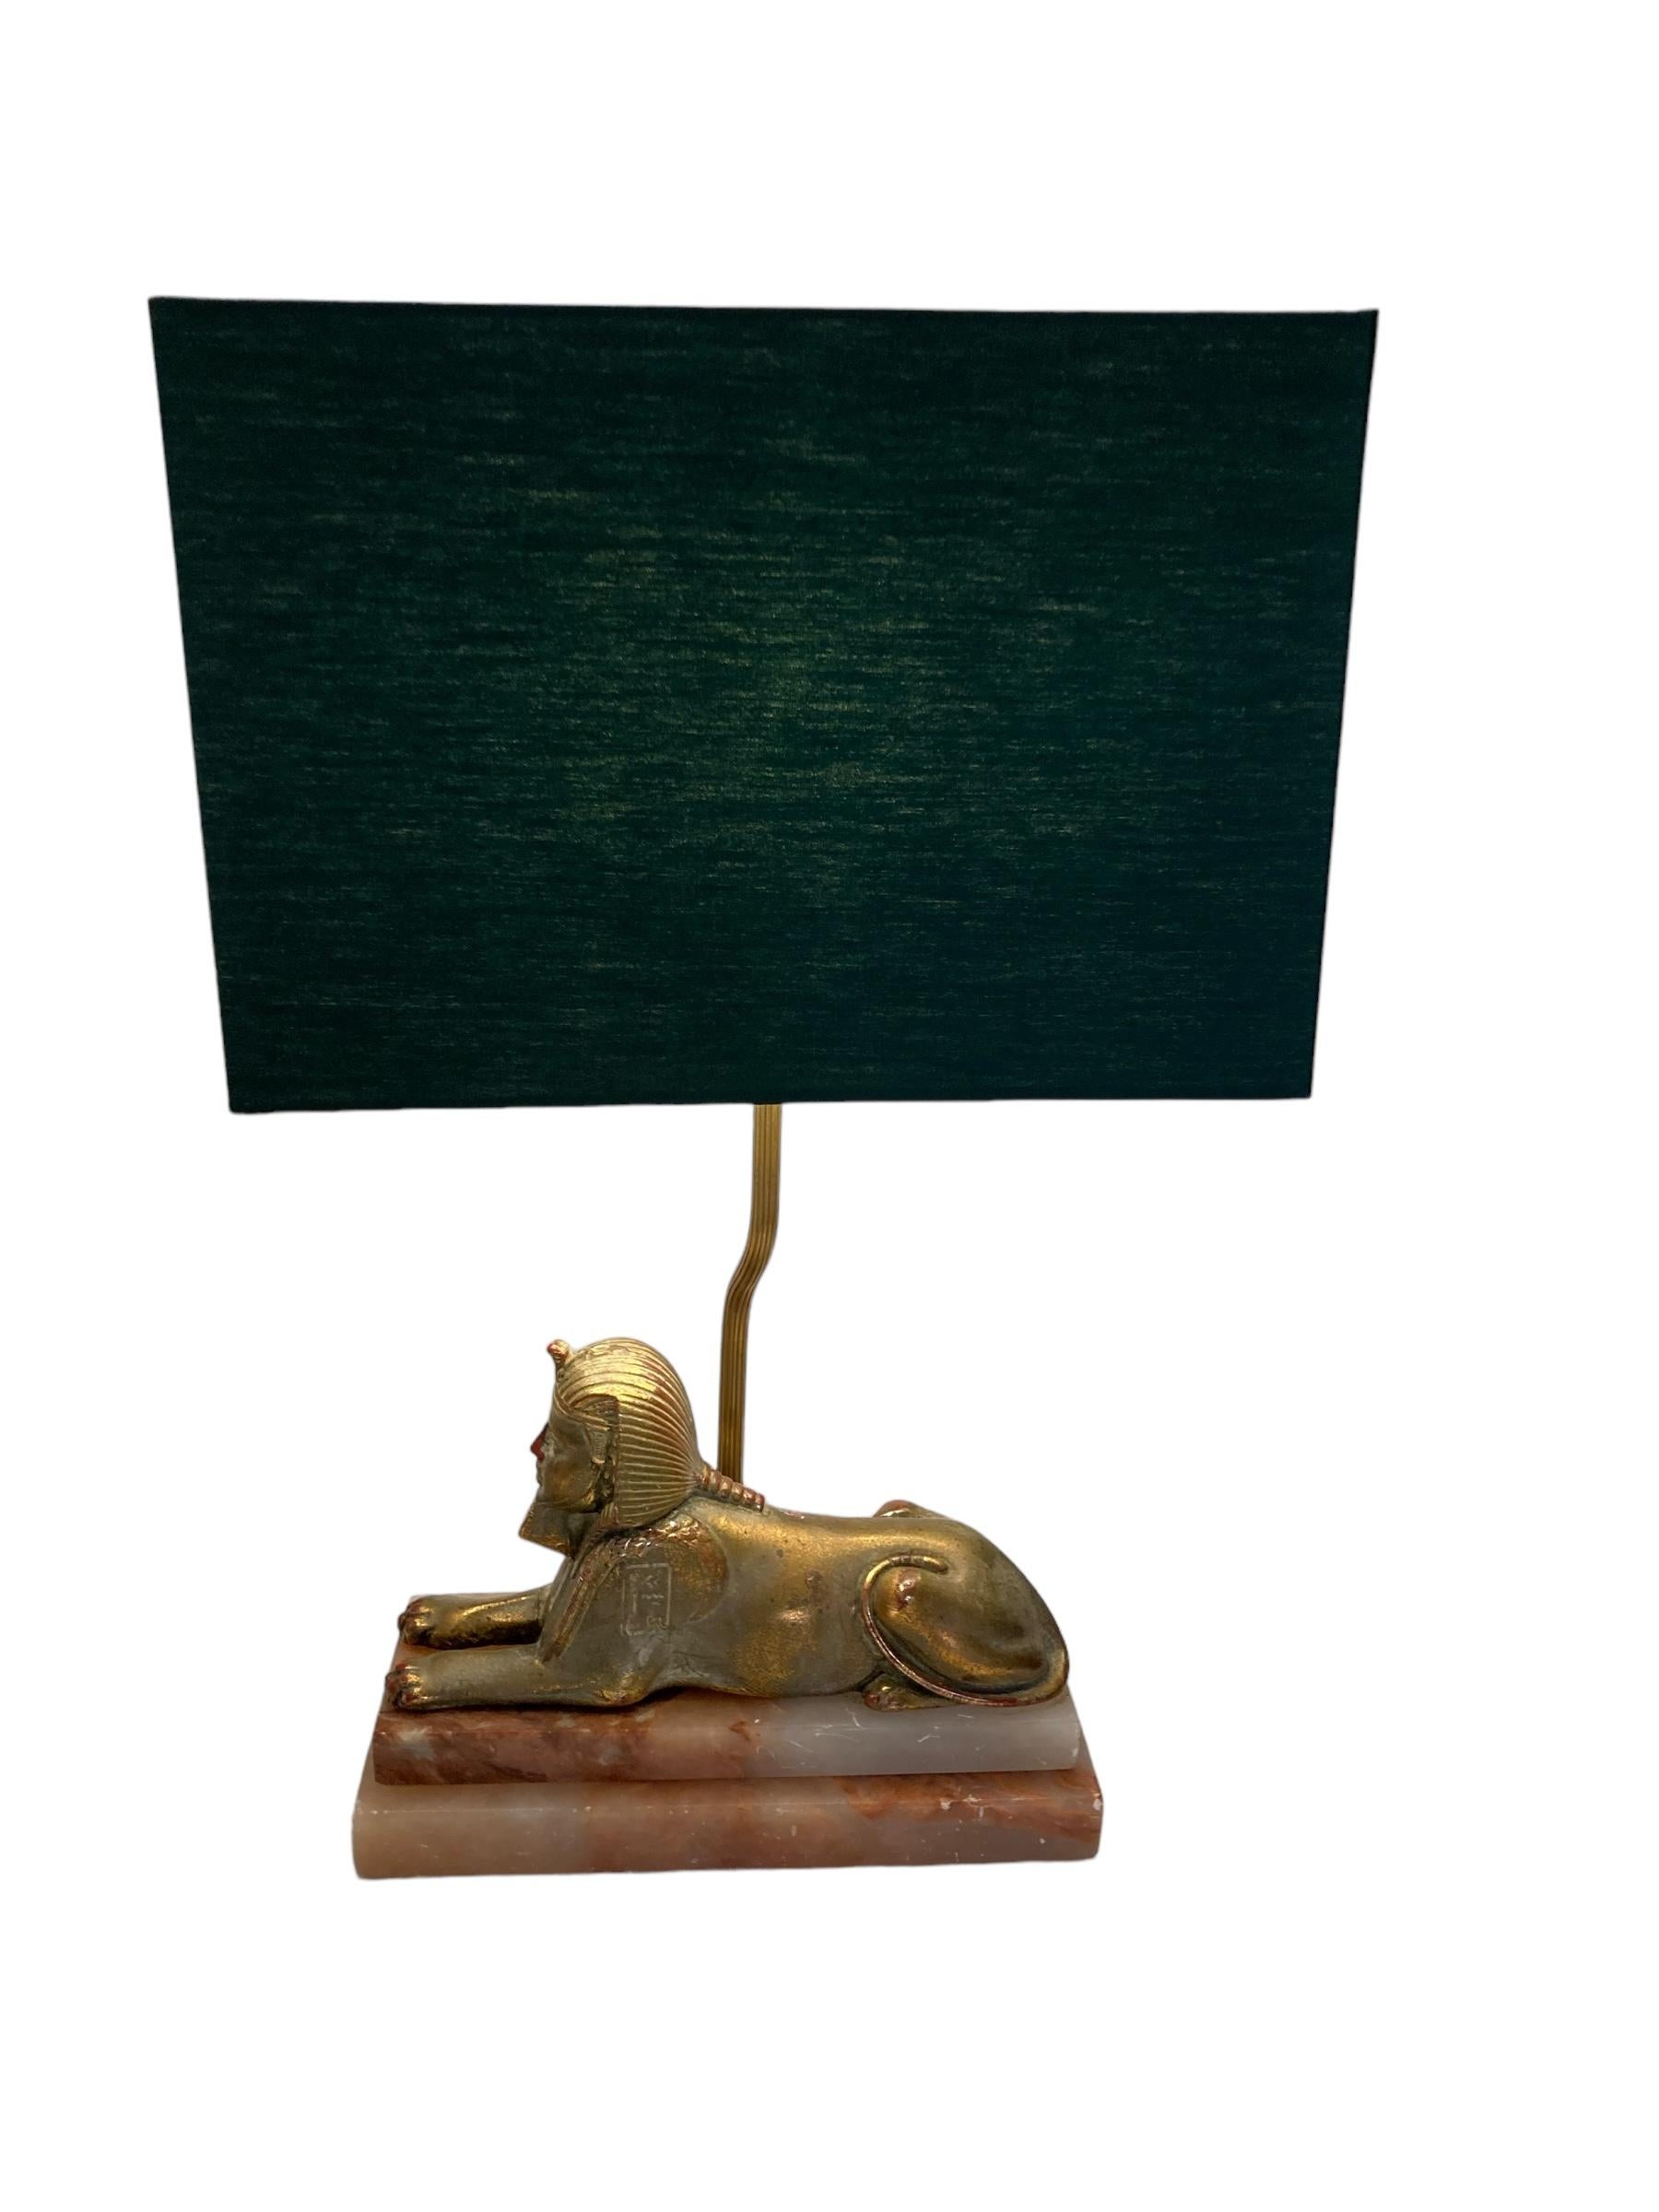 A Pair of Art Deco Egytian Sphinx Table Lamps on a Marble Base Dark Green Shades 2